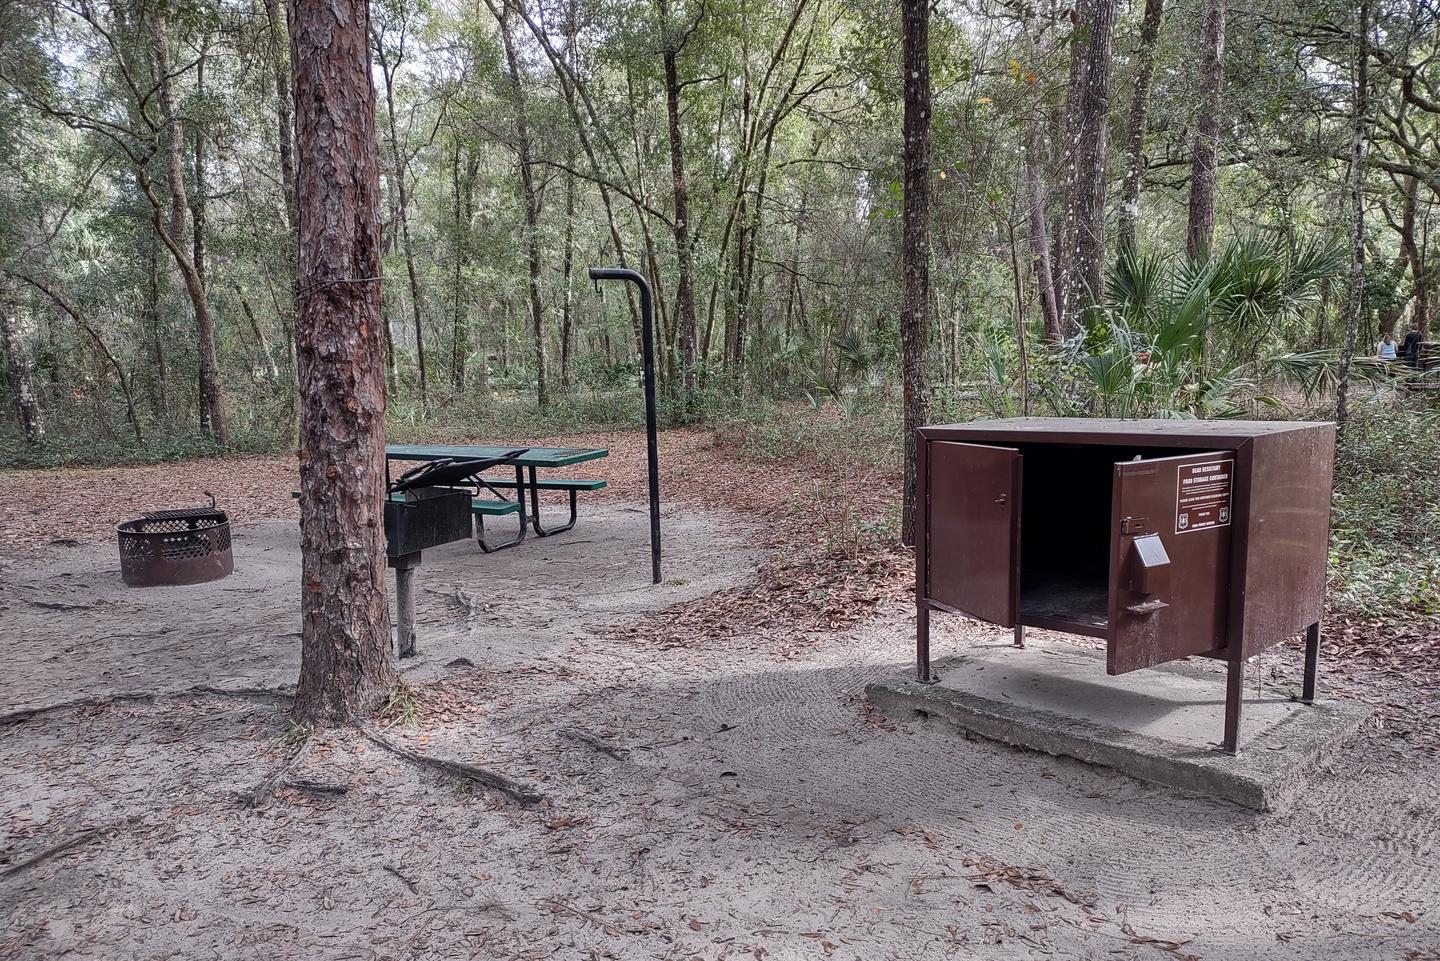 Another view of site 67Amenities: fire ring, picnic table, light pole, grill, bear-proof storage locker